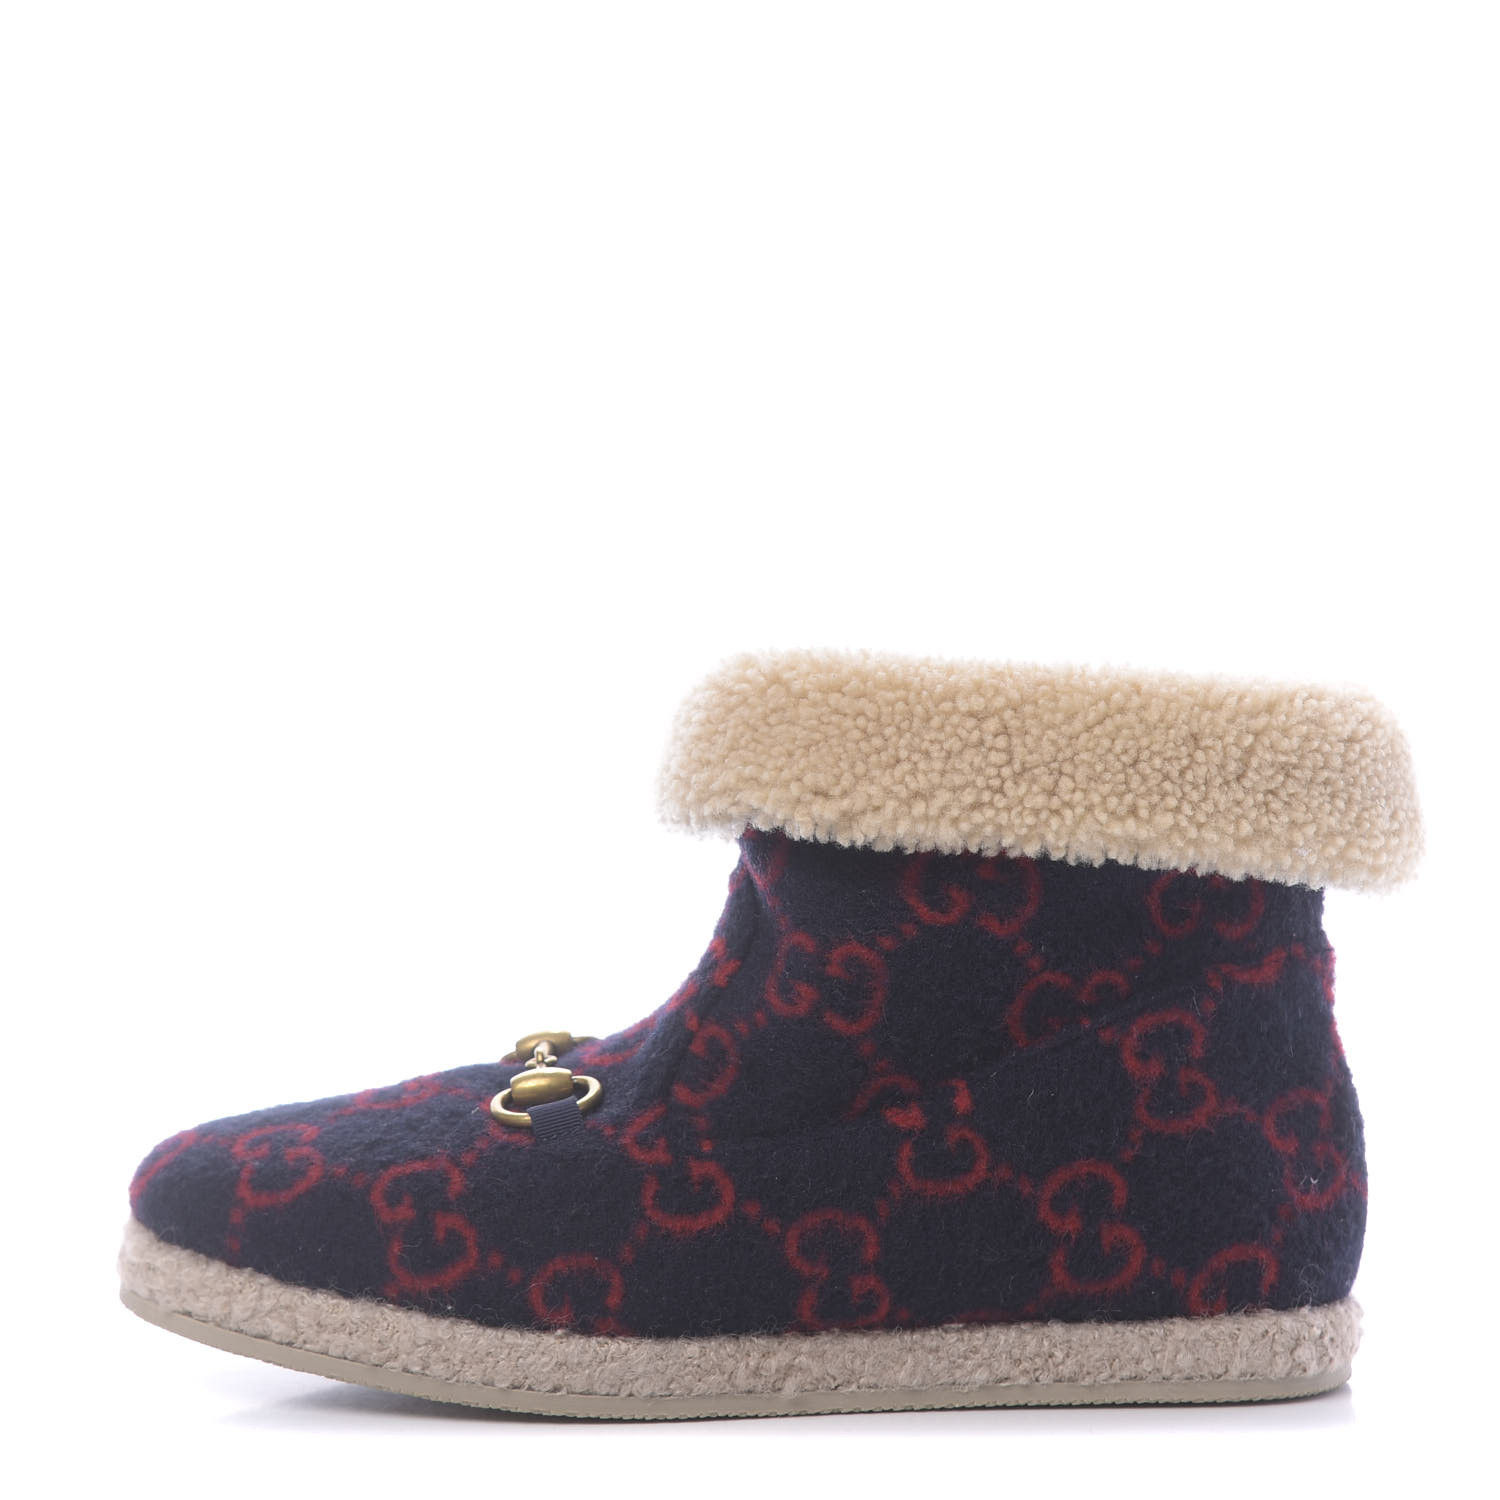 Wool GG Ankle Boots 37 Blue Red 647384 FASHIONPHILE